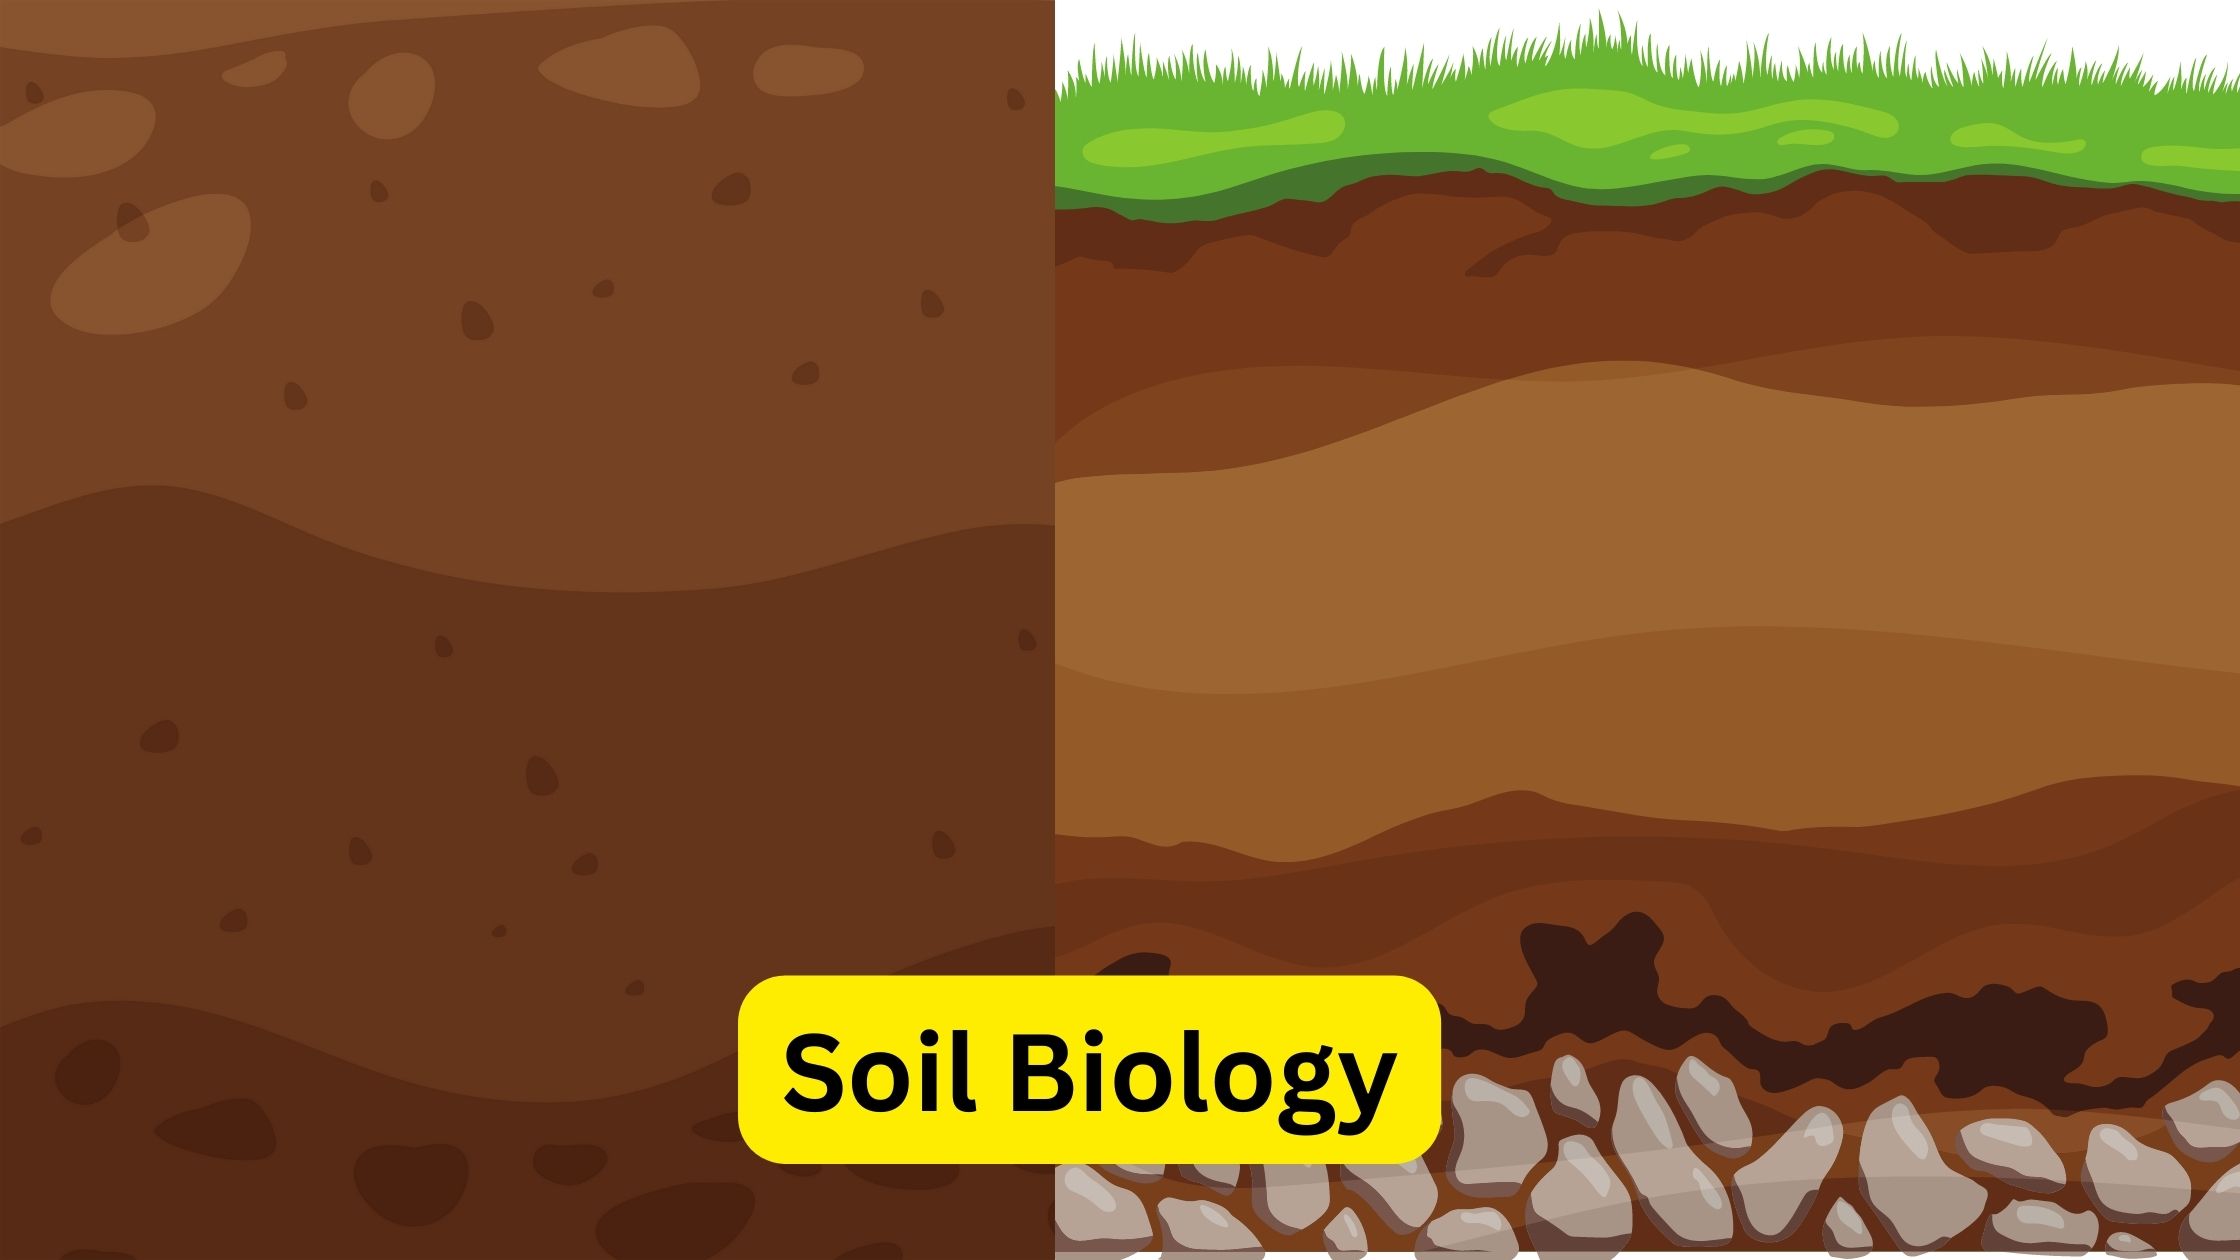 Soil Biology - Definition, Types, Proterties, Importance